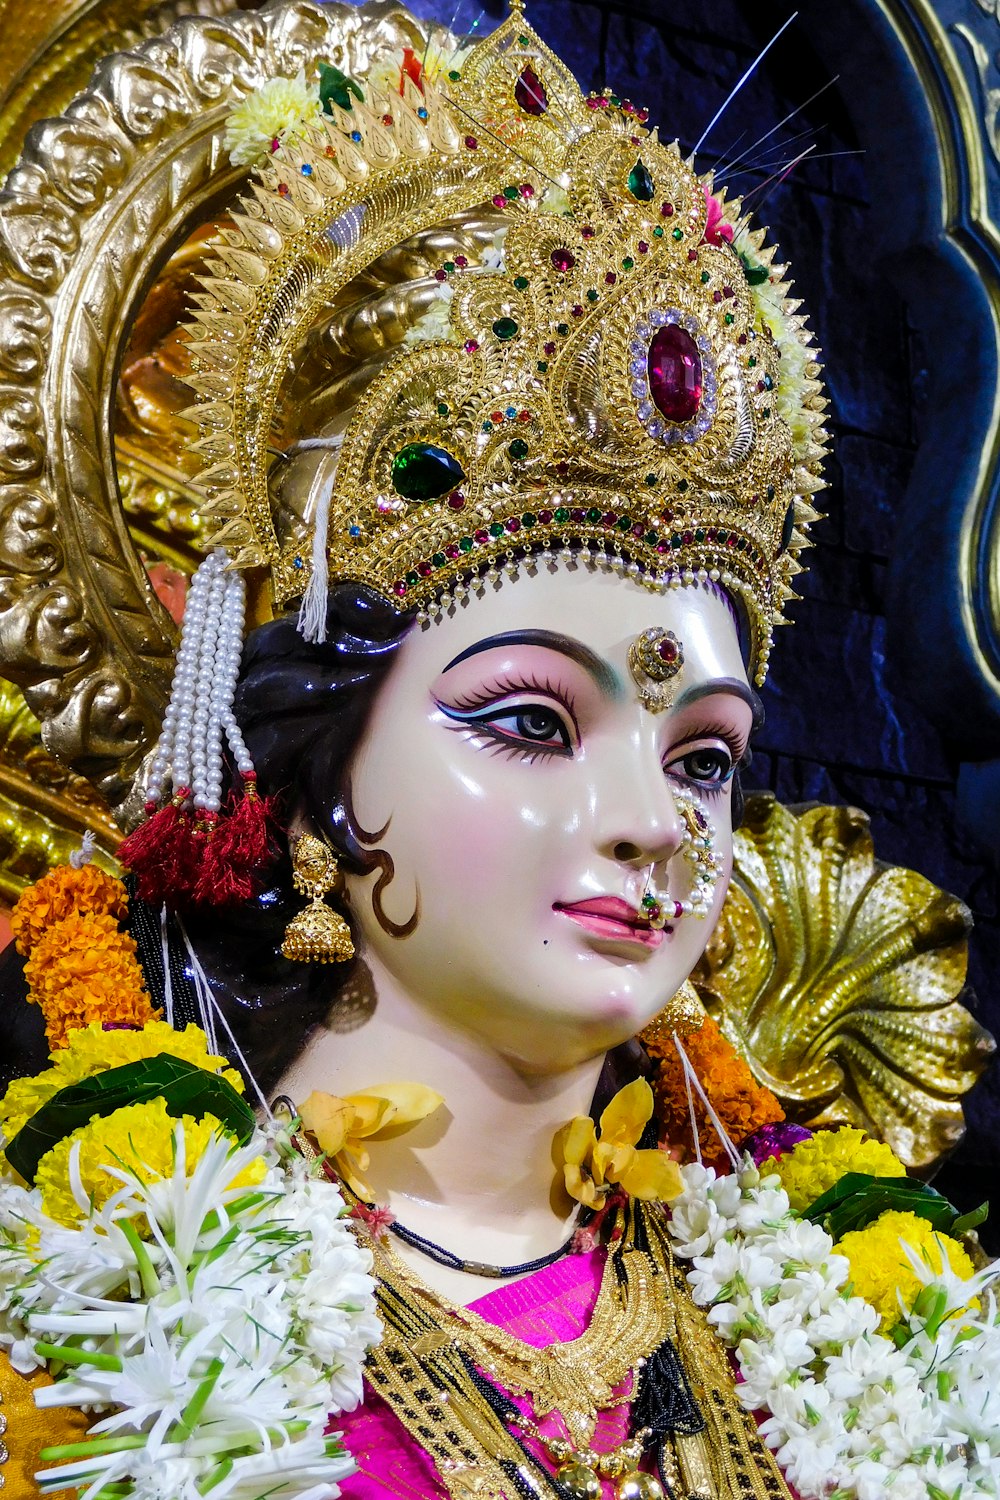 “Outstanding Selection of Durga Images in Full 4K Quality – More Than 999 to Choose From”